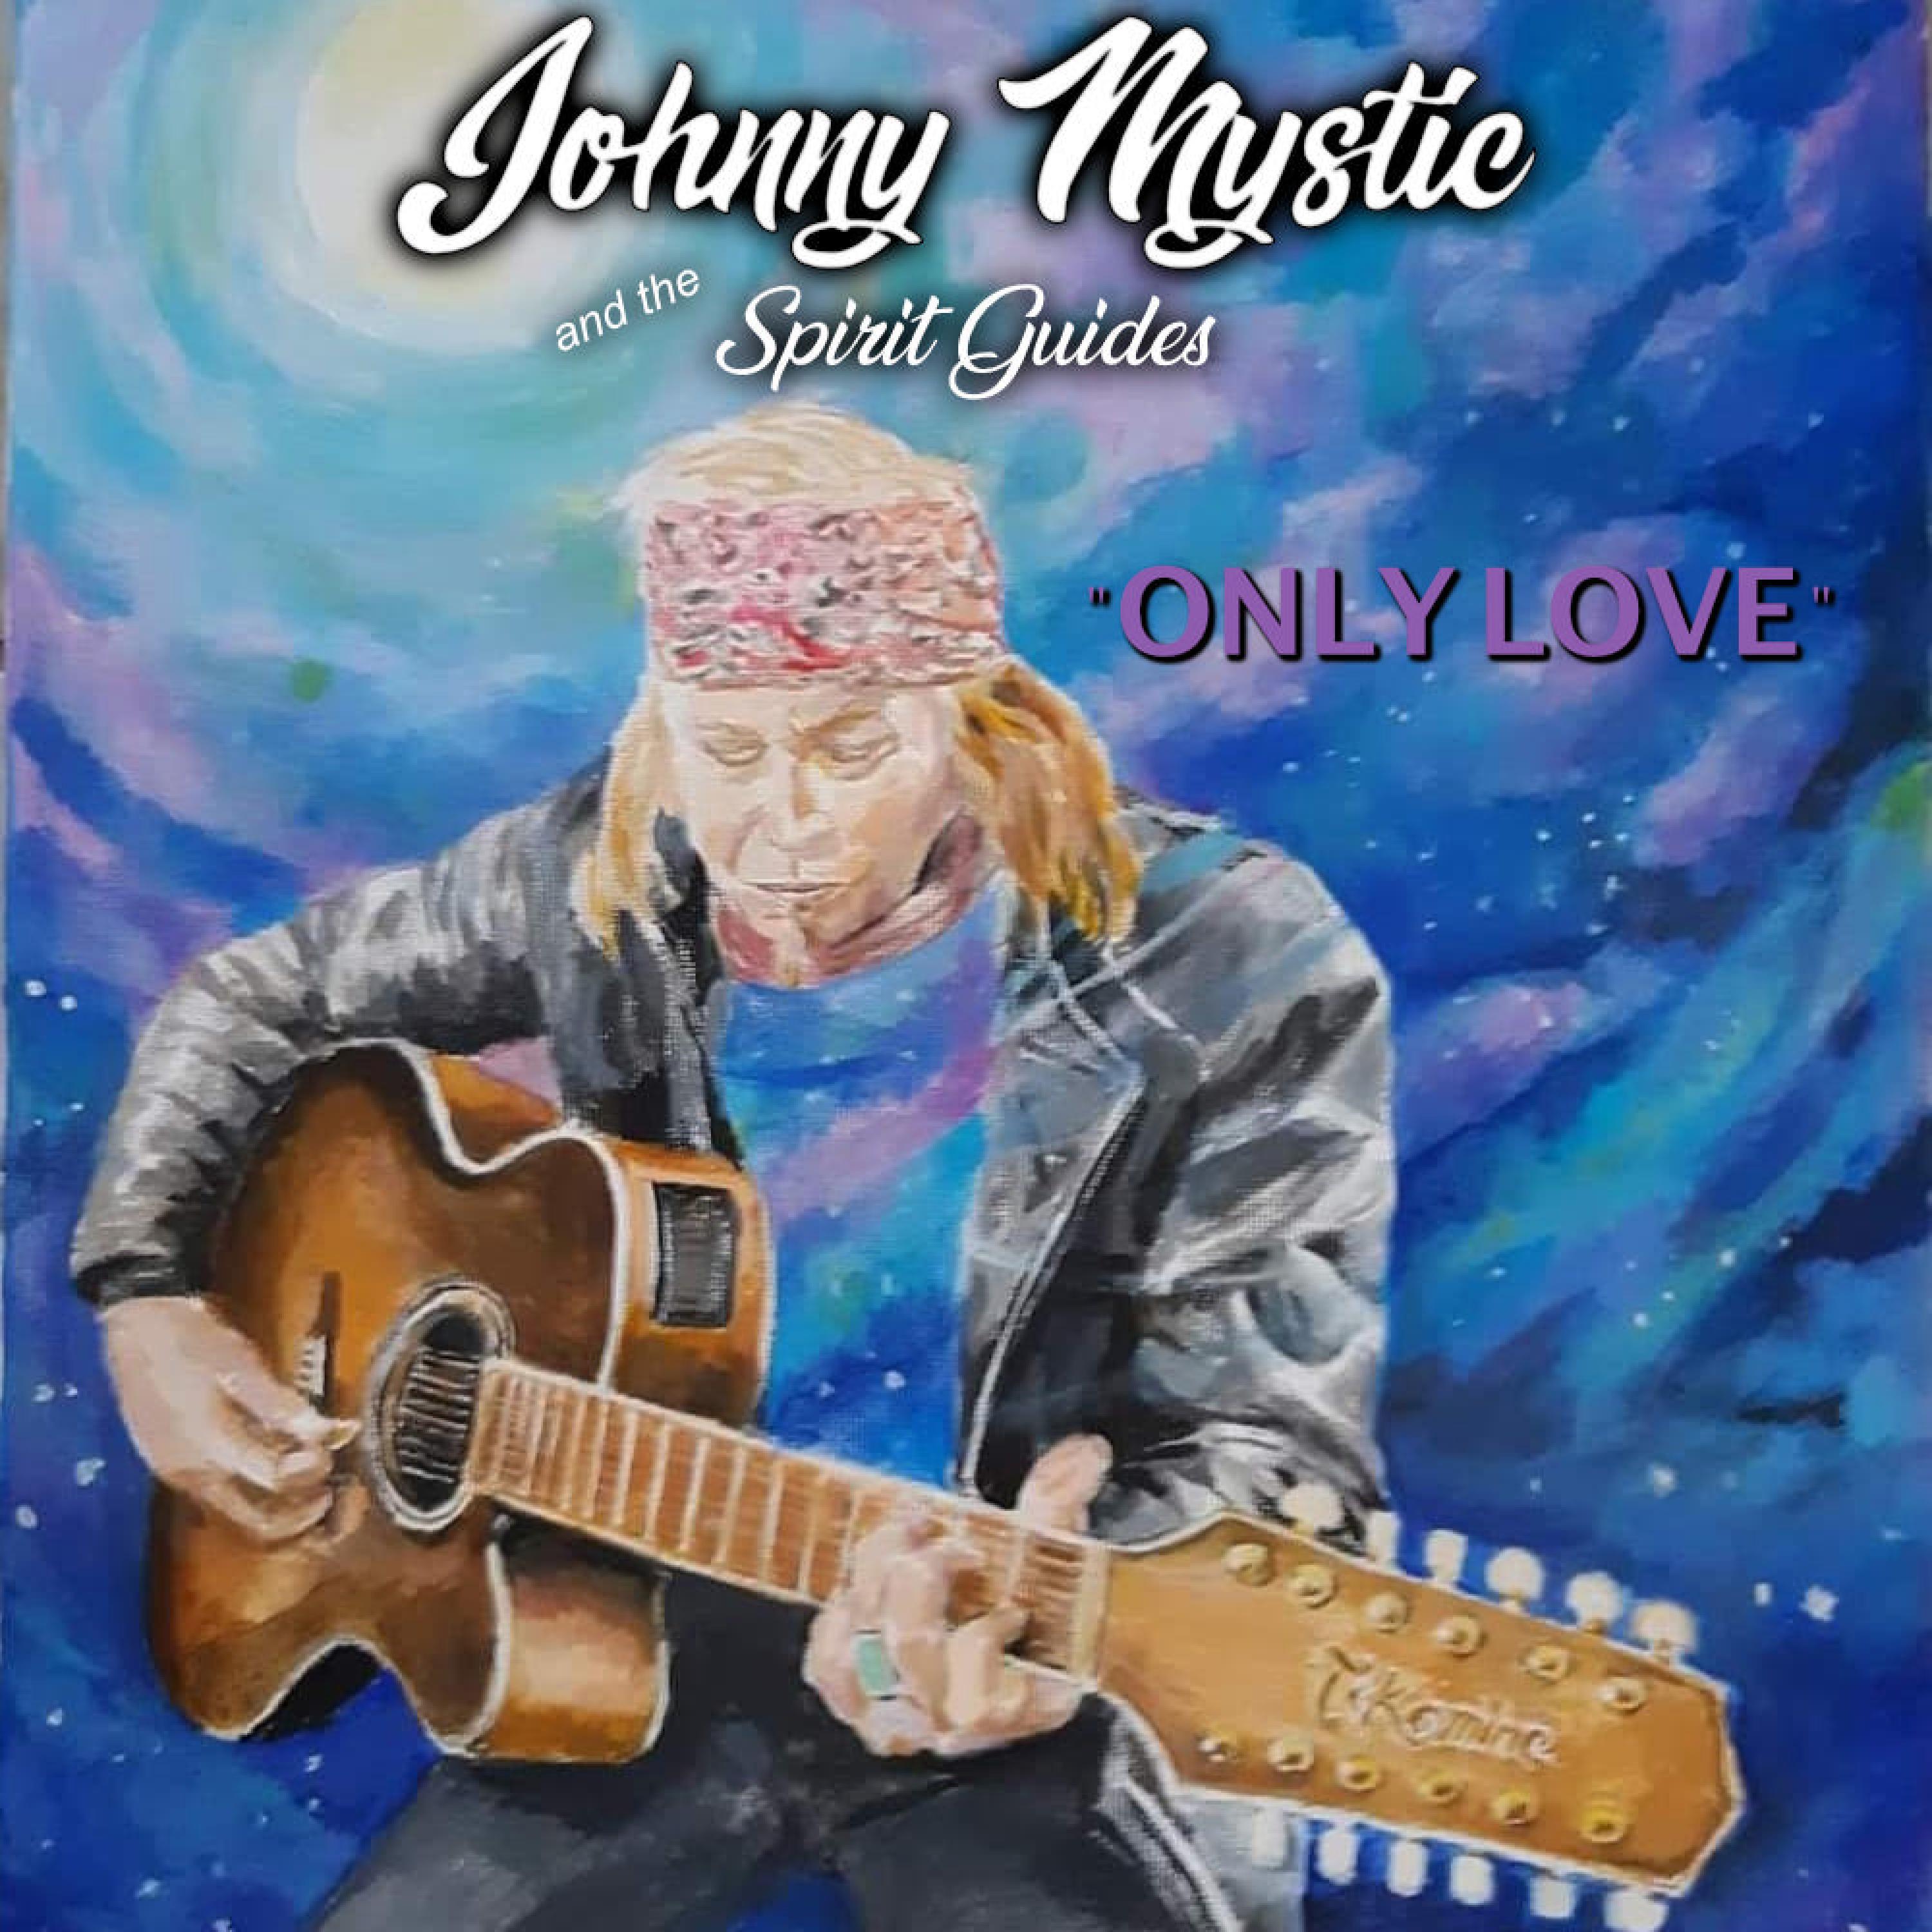 Johnny Mystic and the Spirit Guides - Only Love